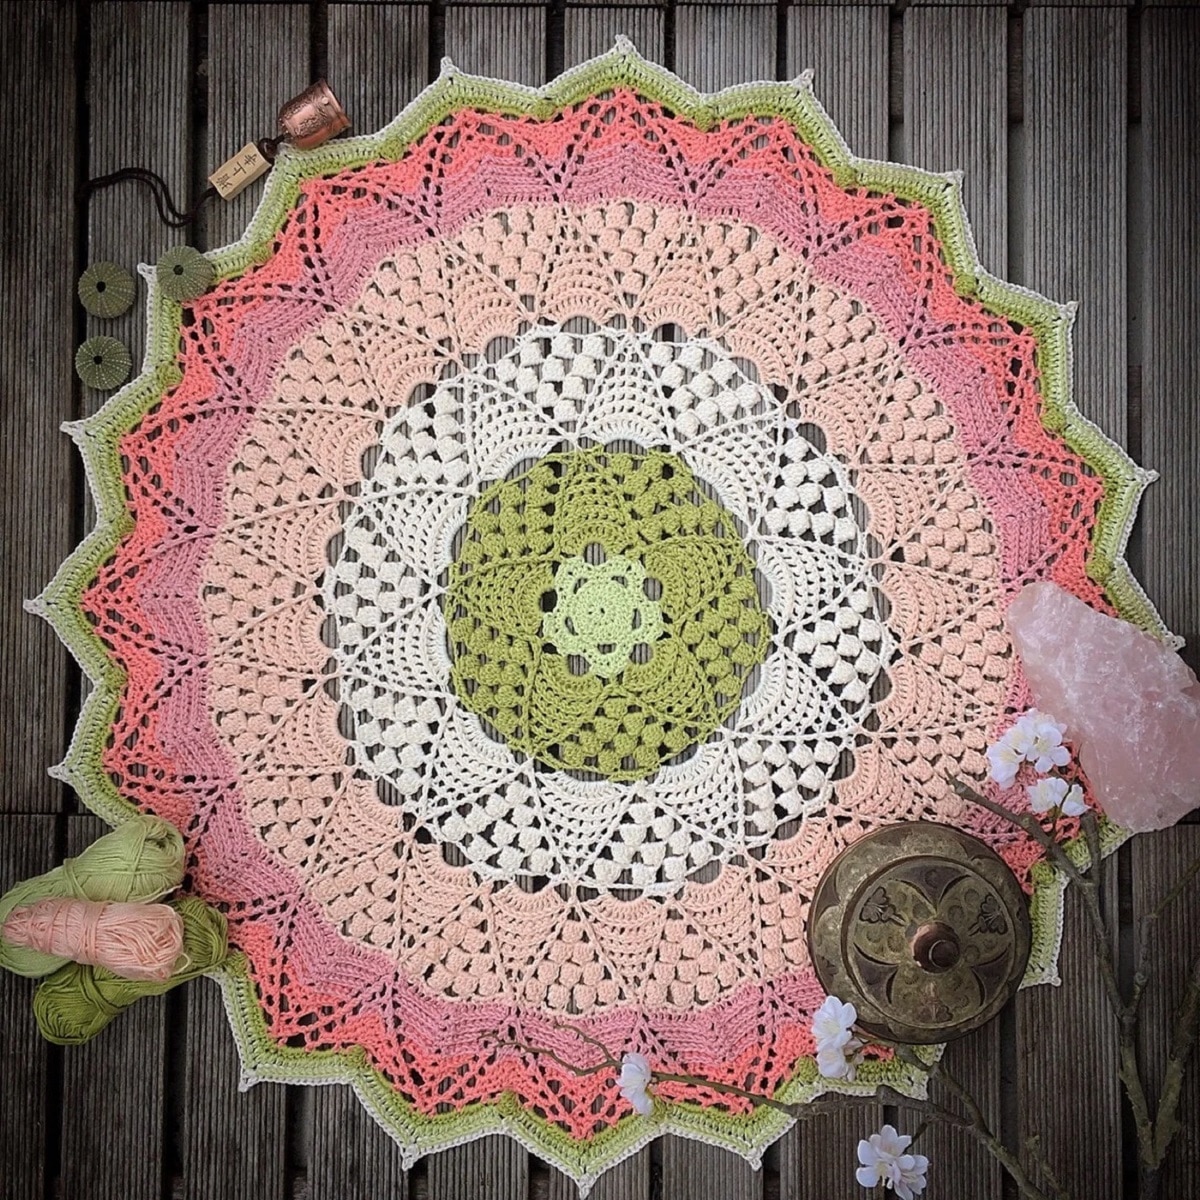 A pastel colored crochet doily mandala with a green flower in the center on a gray wooden floor.